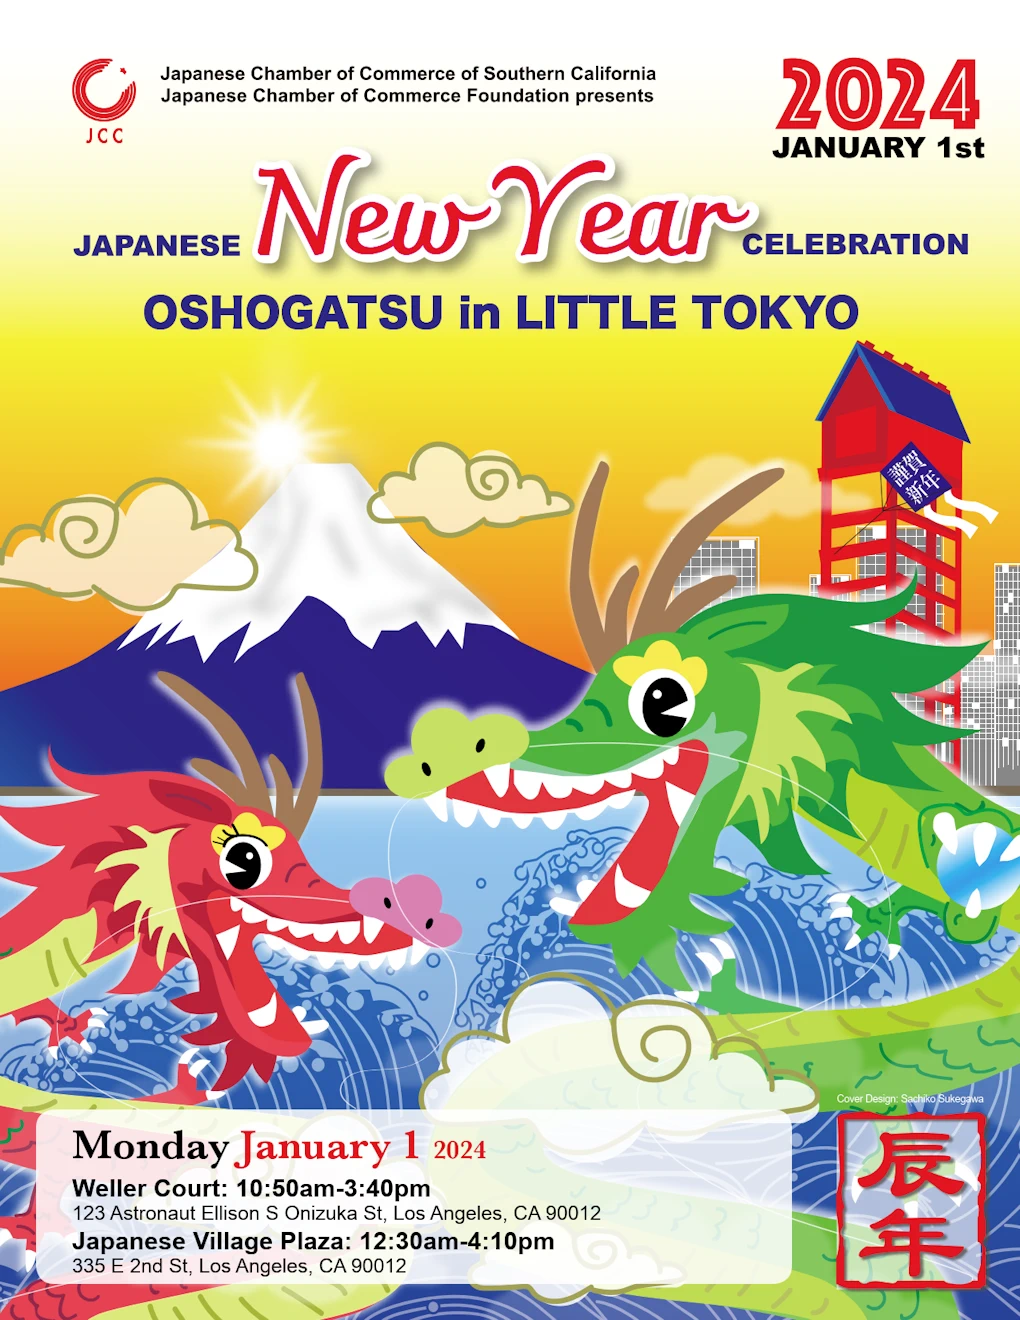 2023 - 24th Annual Japanese New Year's Oshogatsu Festival Event - Little Tokyo (2 Locations - Jan 1st, 2023) Entertainment - Updated Schedule!        